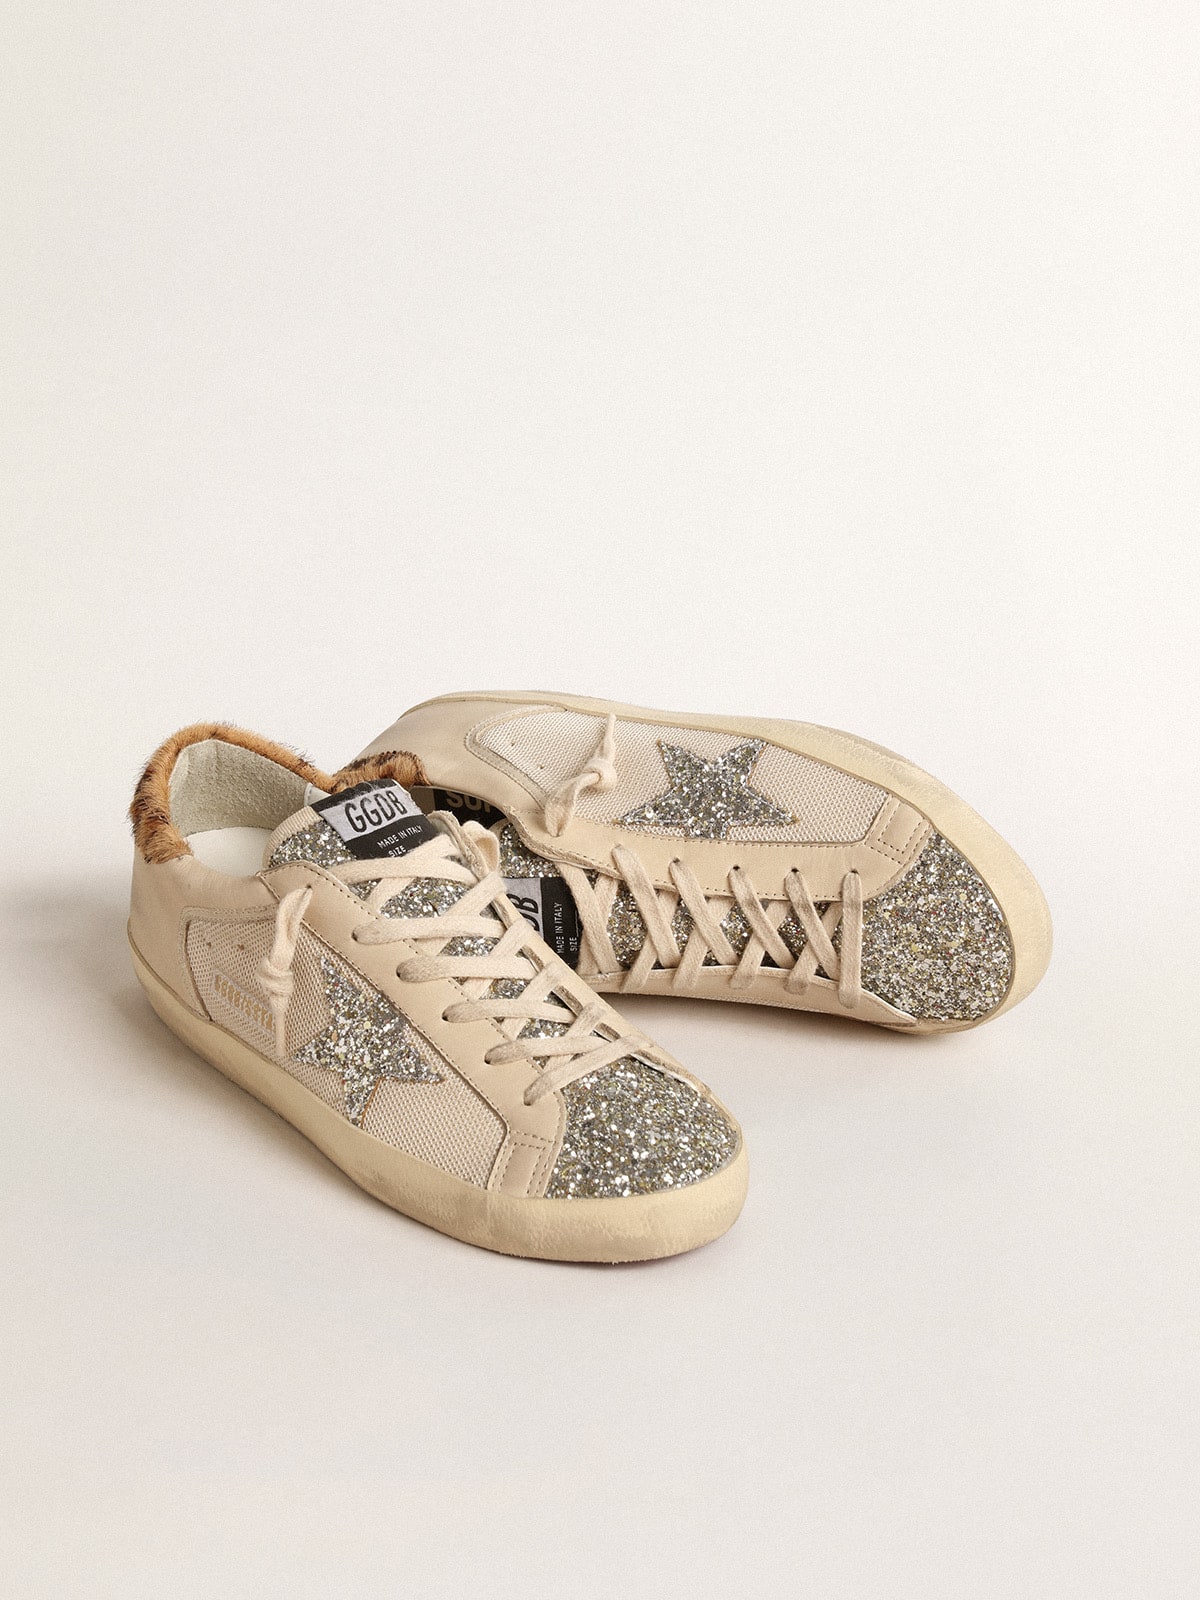 Super-Star in cream mesh with glitter star and leopard heel tab